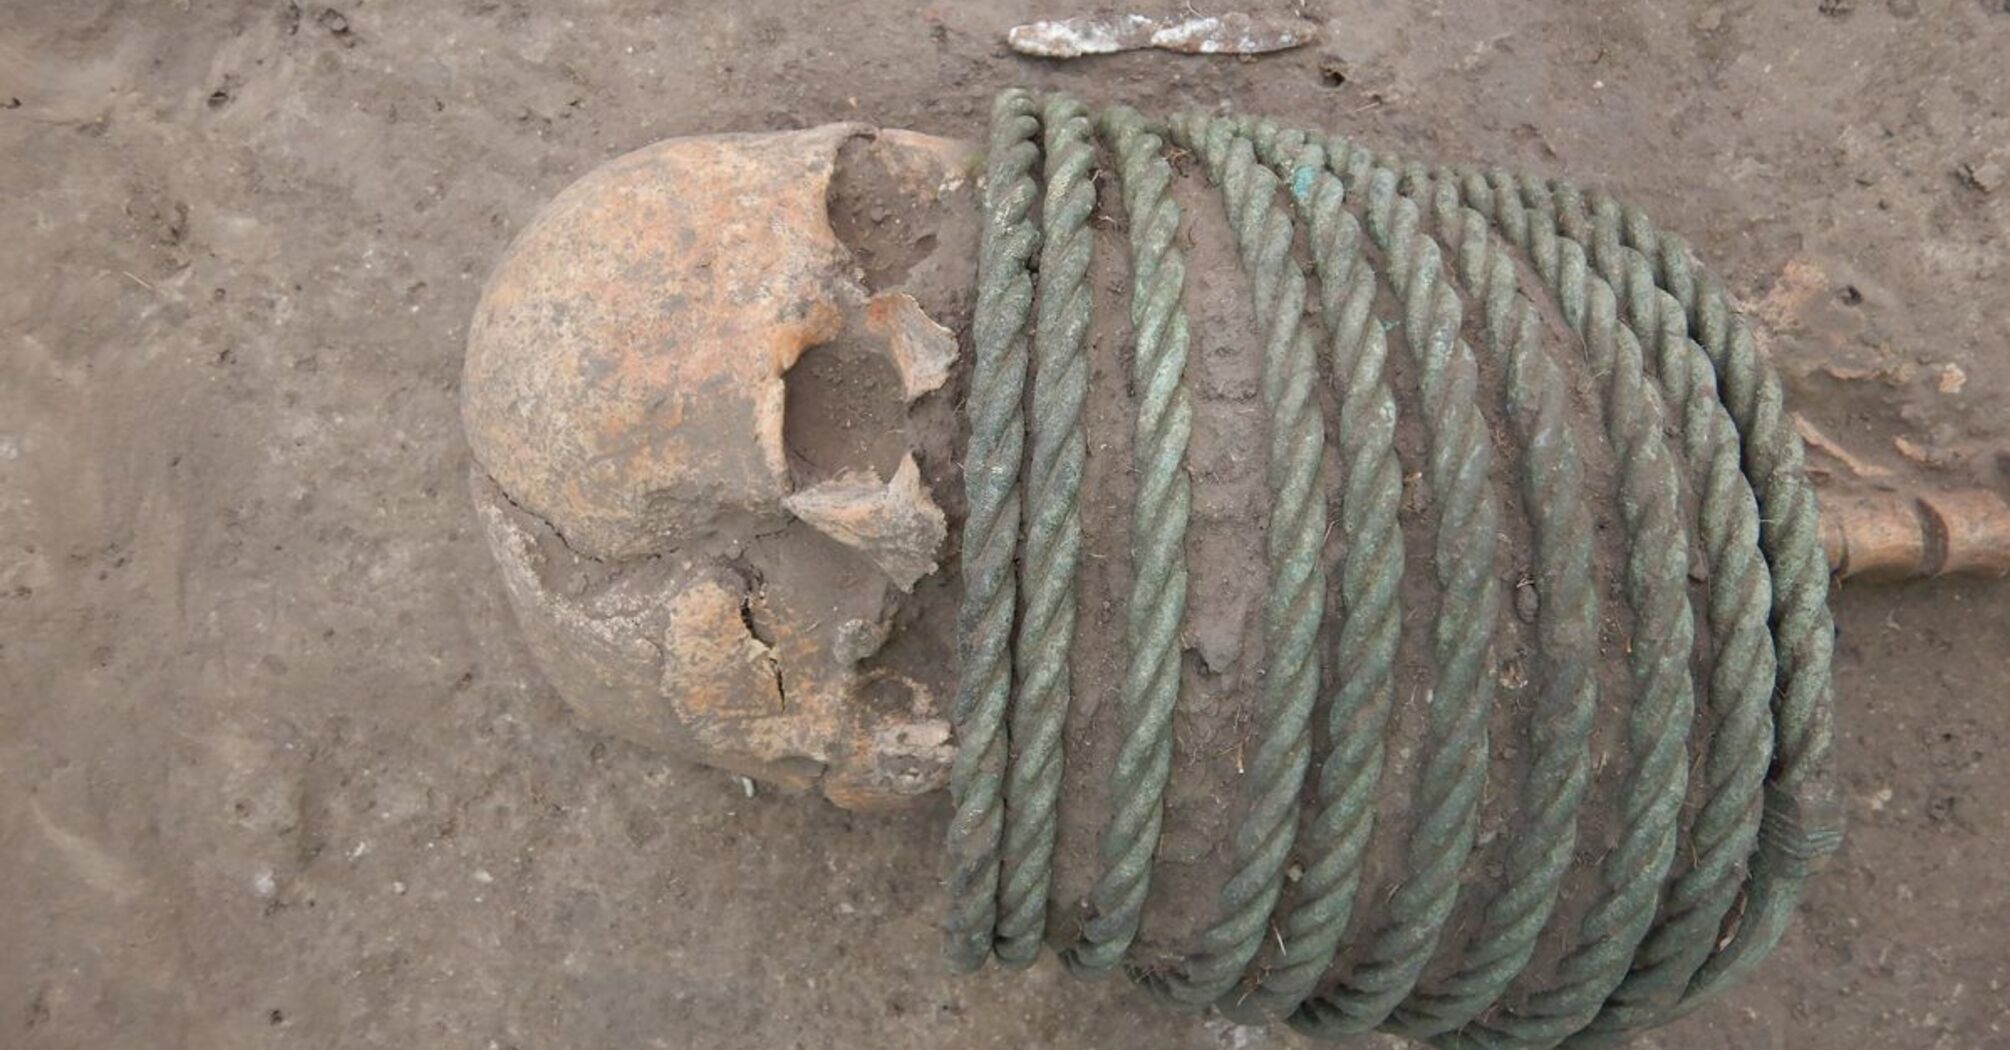 In Ukraine, a 1000-year-old cemetery has been discovered